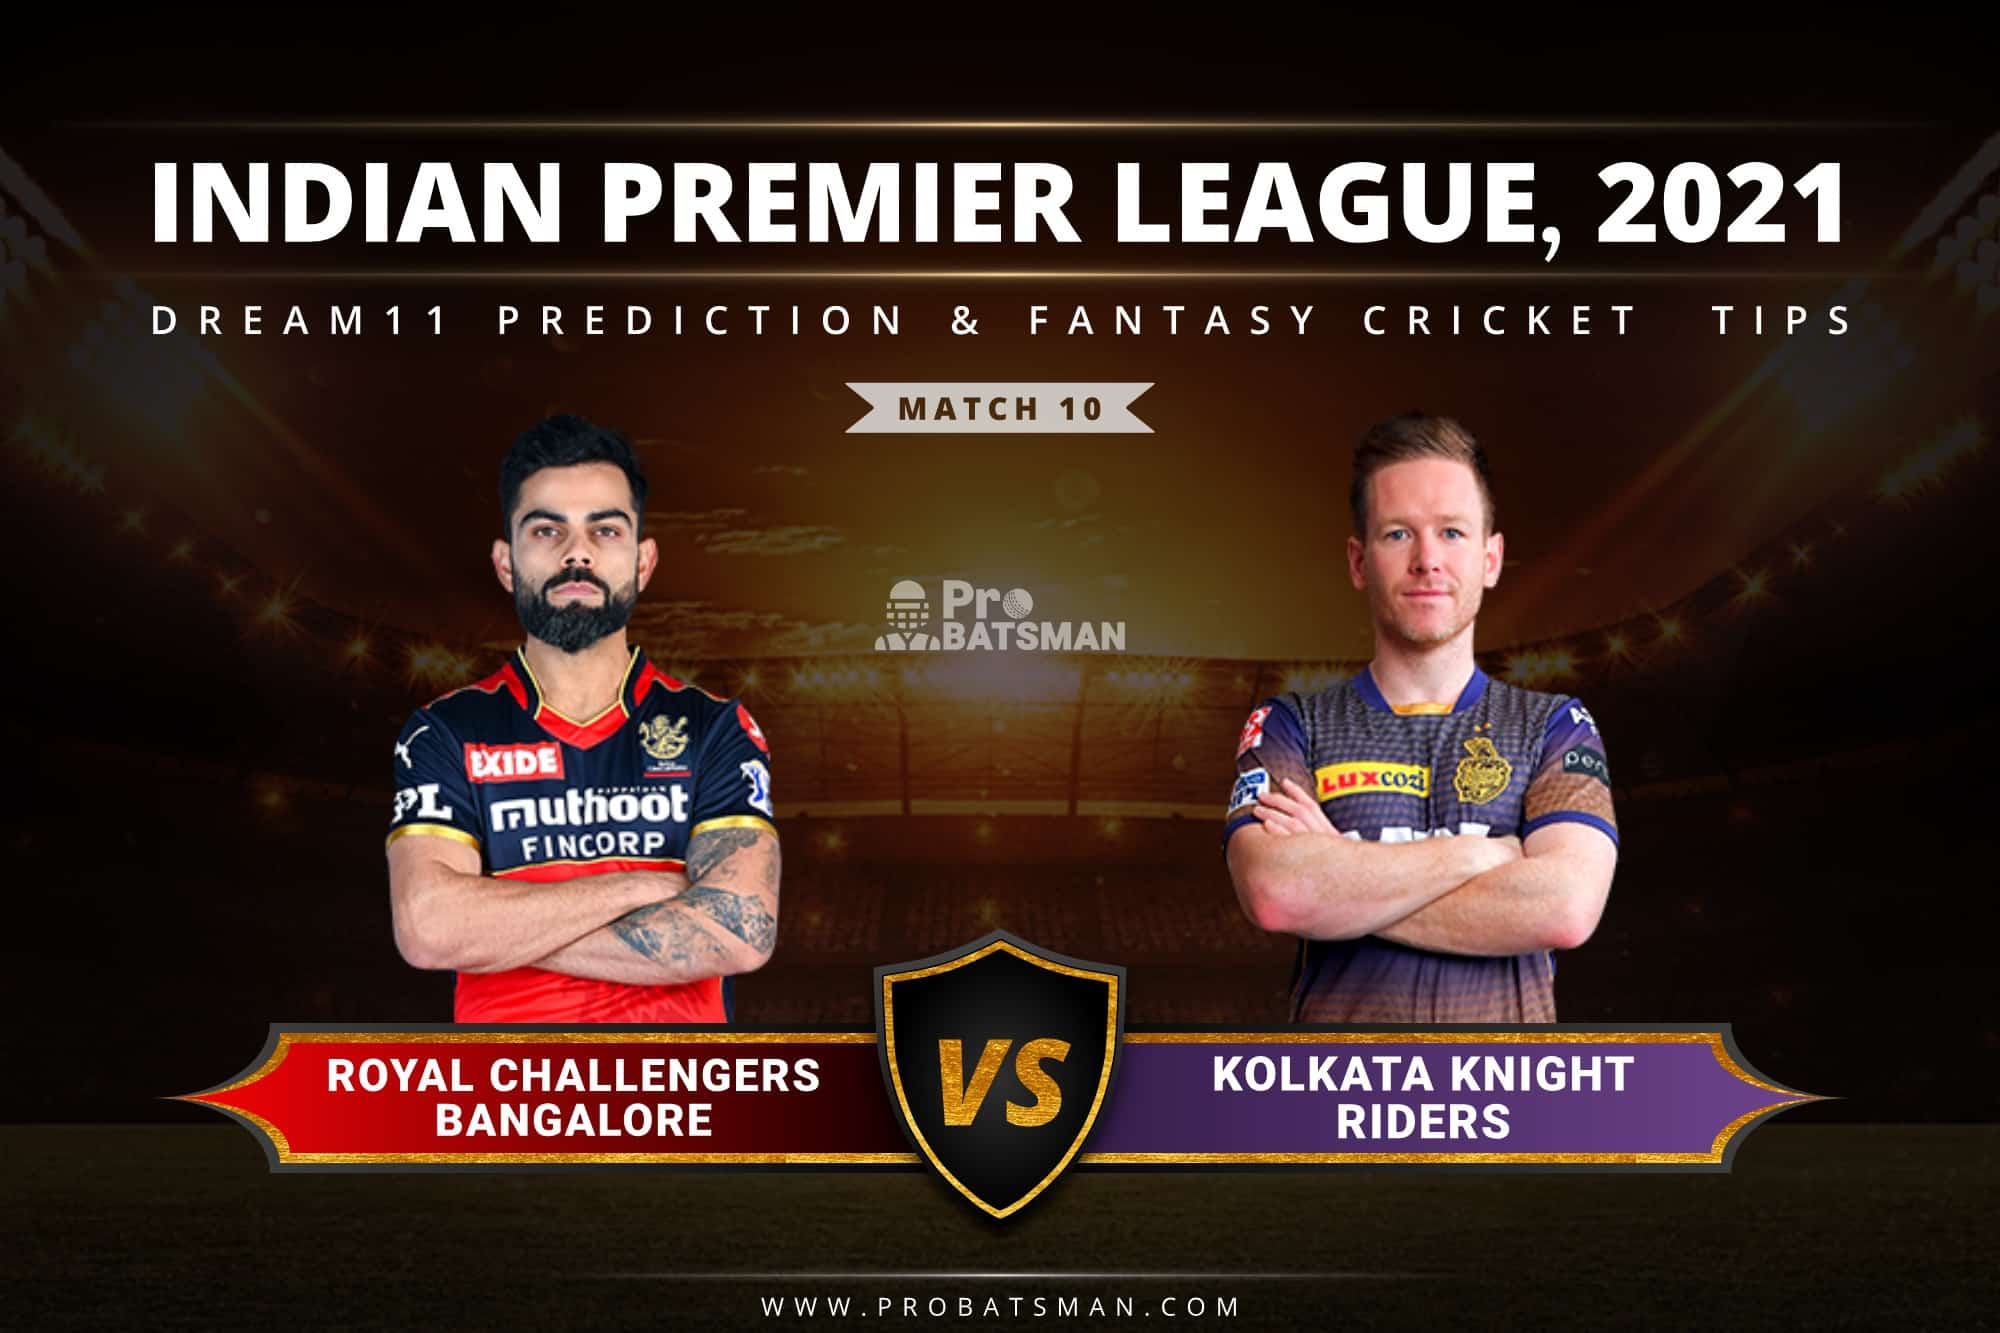 RCB vs KKR Dream11 Prediction: Fantasy Cricket Tips, Playing XI, Pitch Report, Stats & Injury Updates of Match 10, IPL 2021